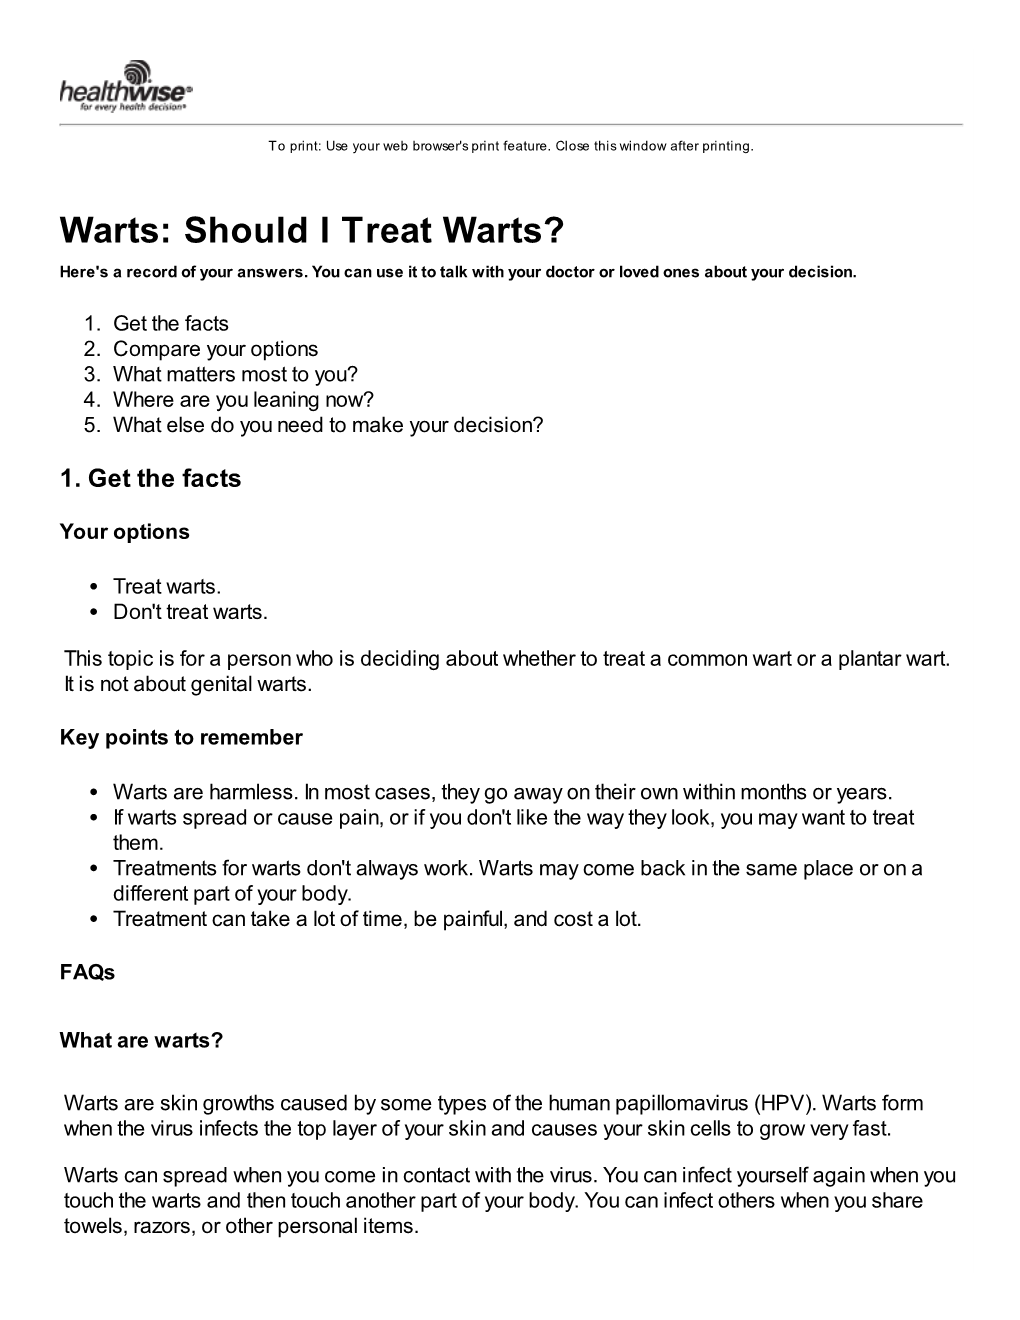 Warts: Should I Treat Warts? Here's a Record of Your Answers